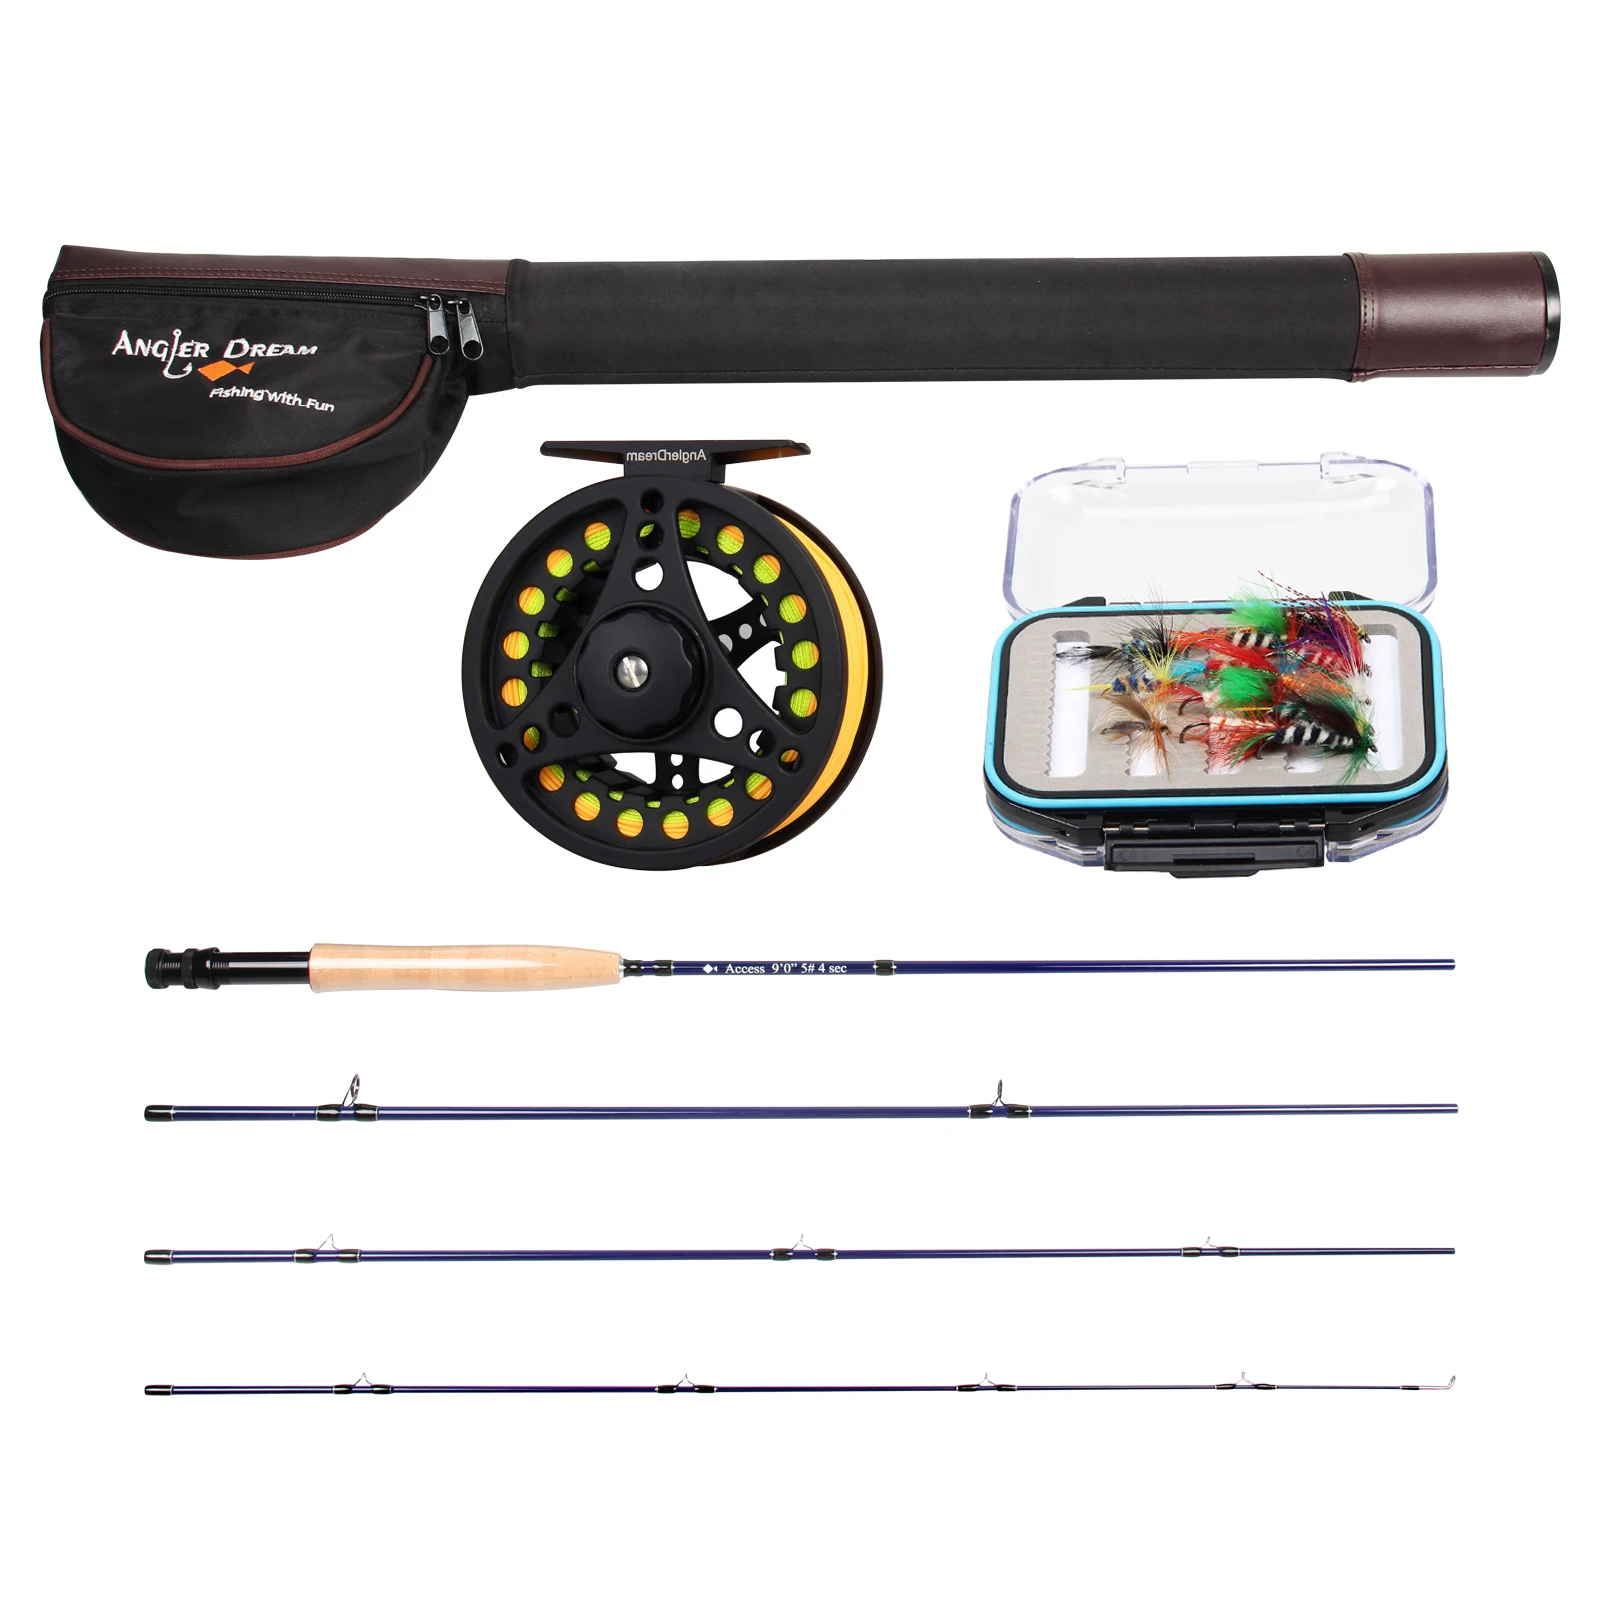 ANGLER DREAM Fly Fishing Rod 30T Carbon Fiber Appliance Accessorie With Fly Fishing Reel And Fly Fishing Line Combo Free Tippet enlarge